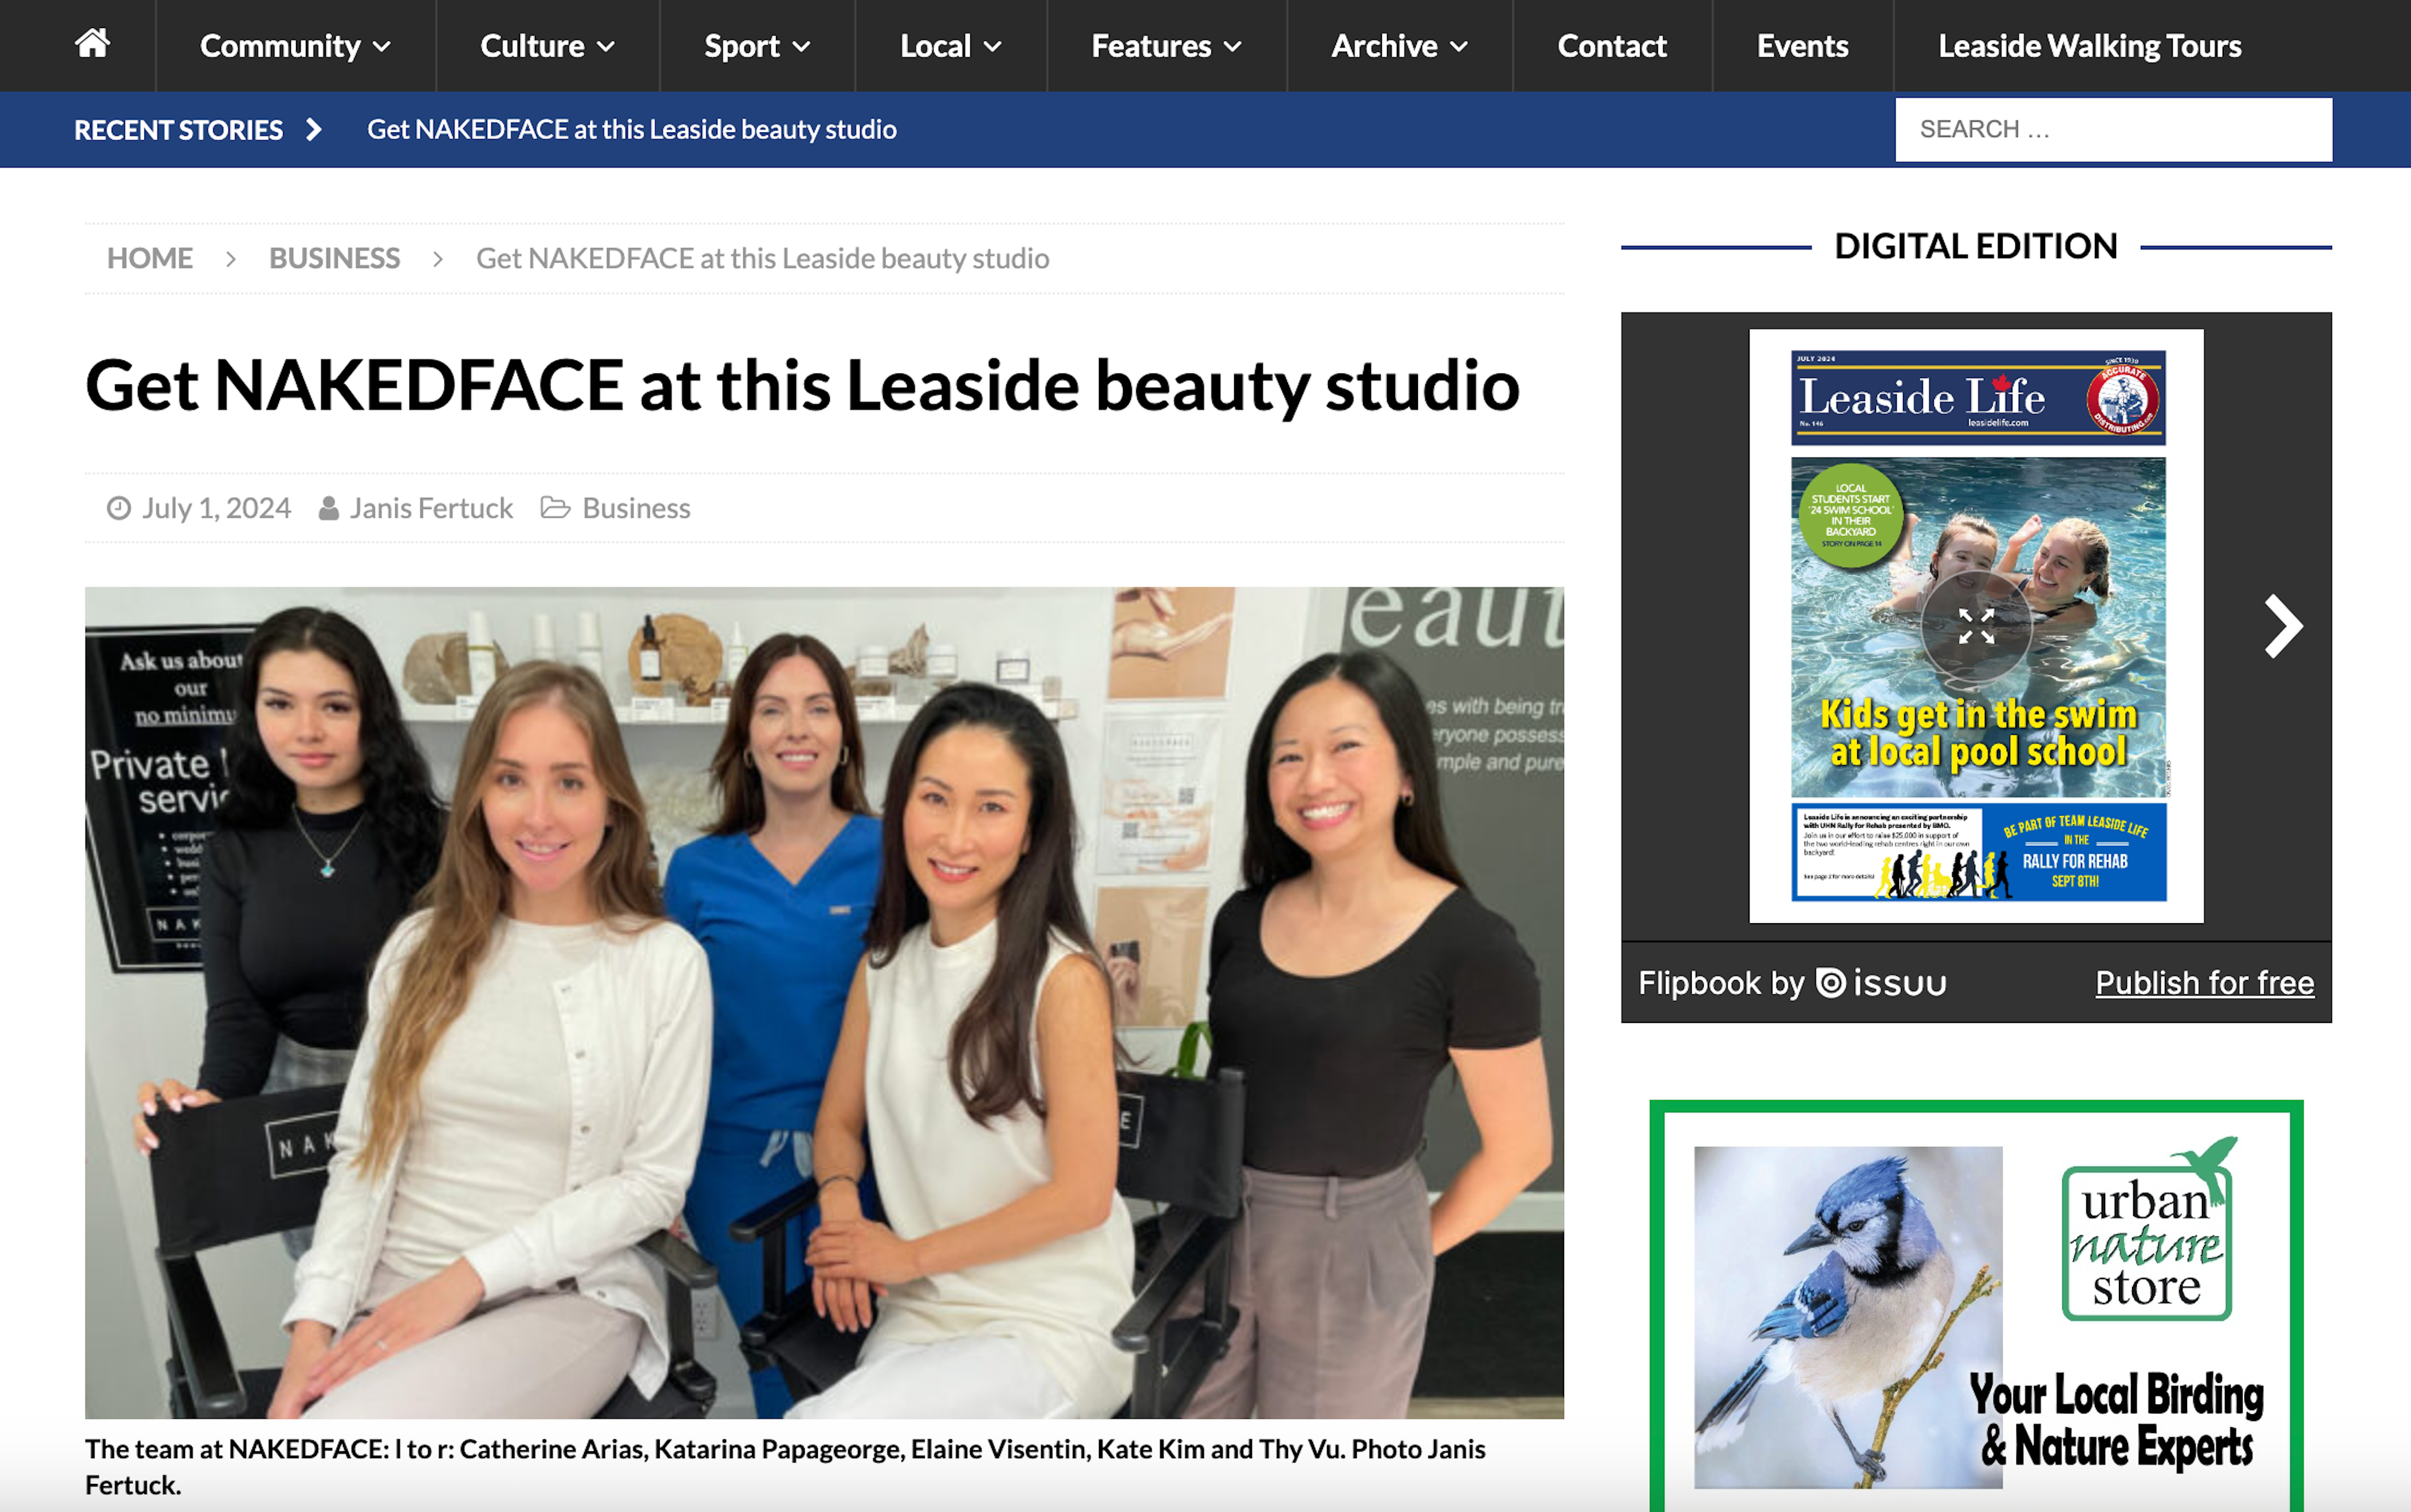 Get NAKEDFACE at this Leaside beauty studio by Janis Fertuck, Leaside Life